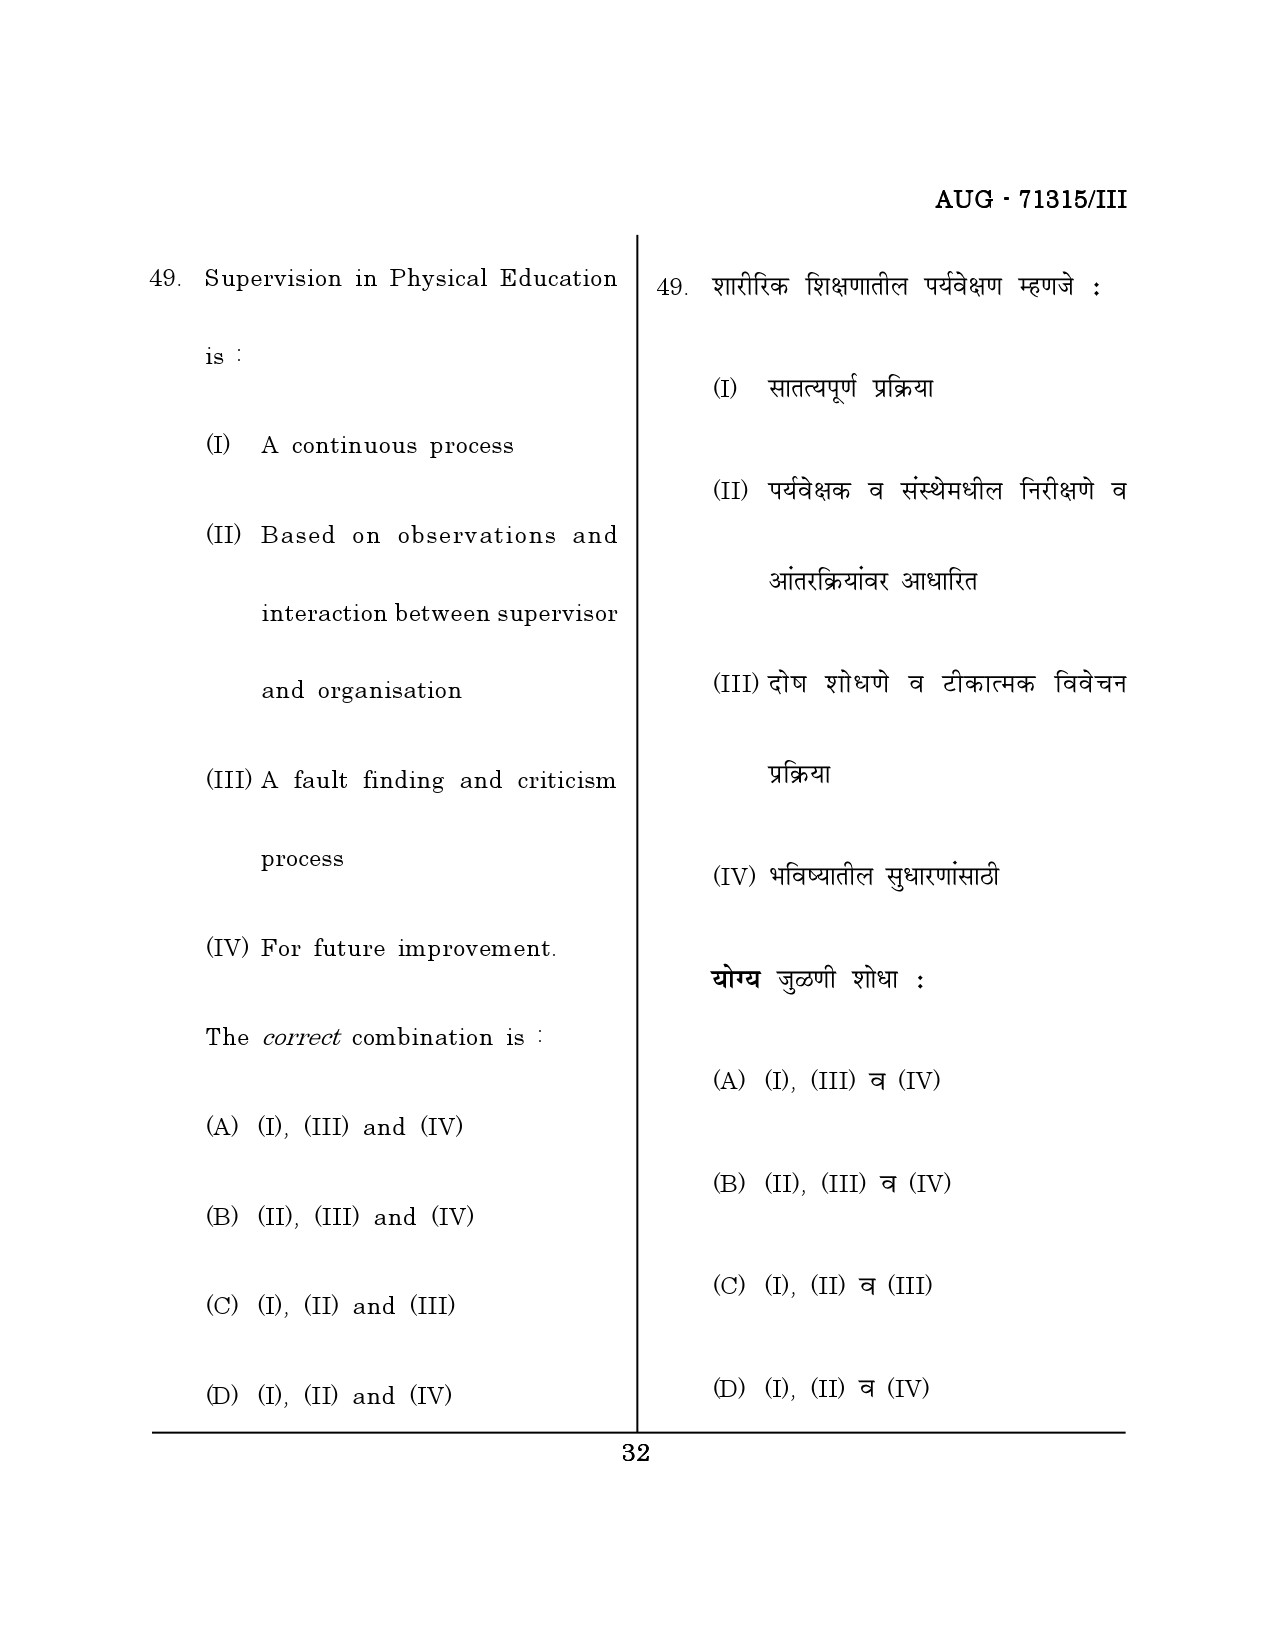 Maharashtra SET Physical Education Question Paper III August 2015 31